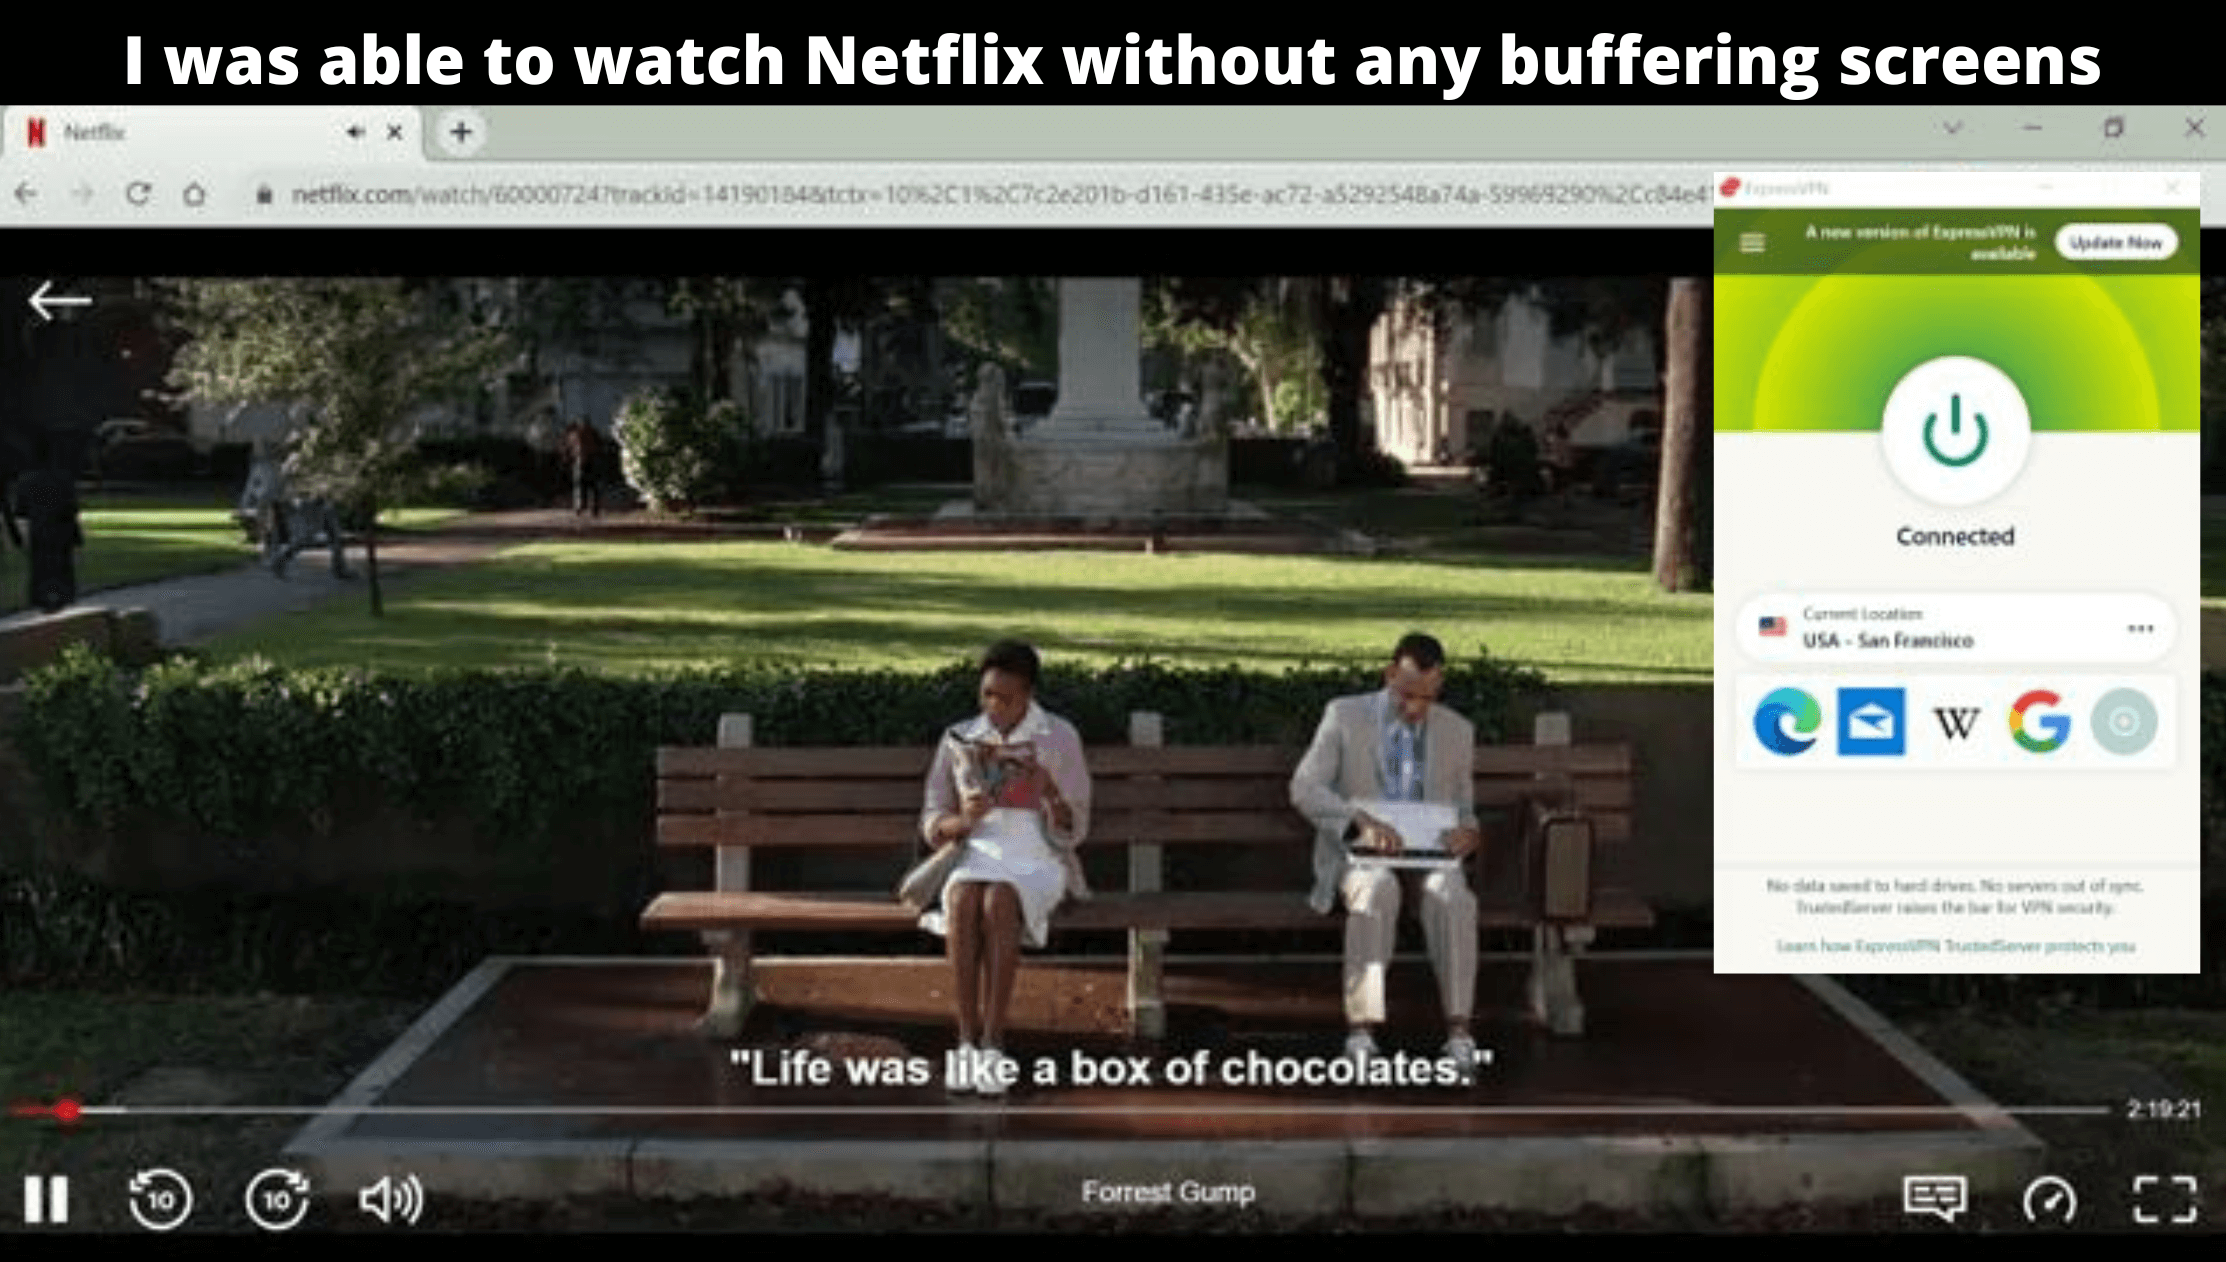 Unblocked: 20+ Netflix libraries including US, UK, and Japan